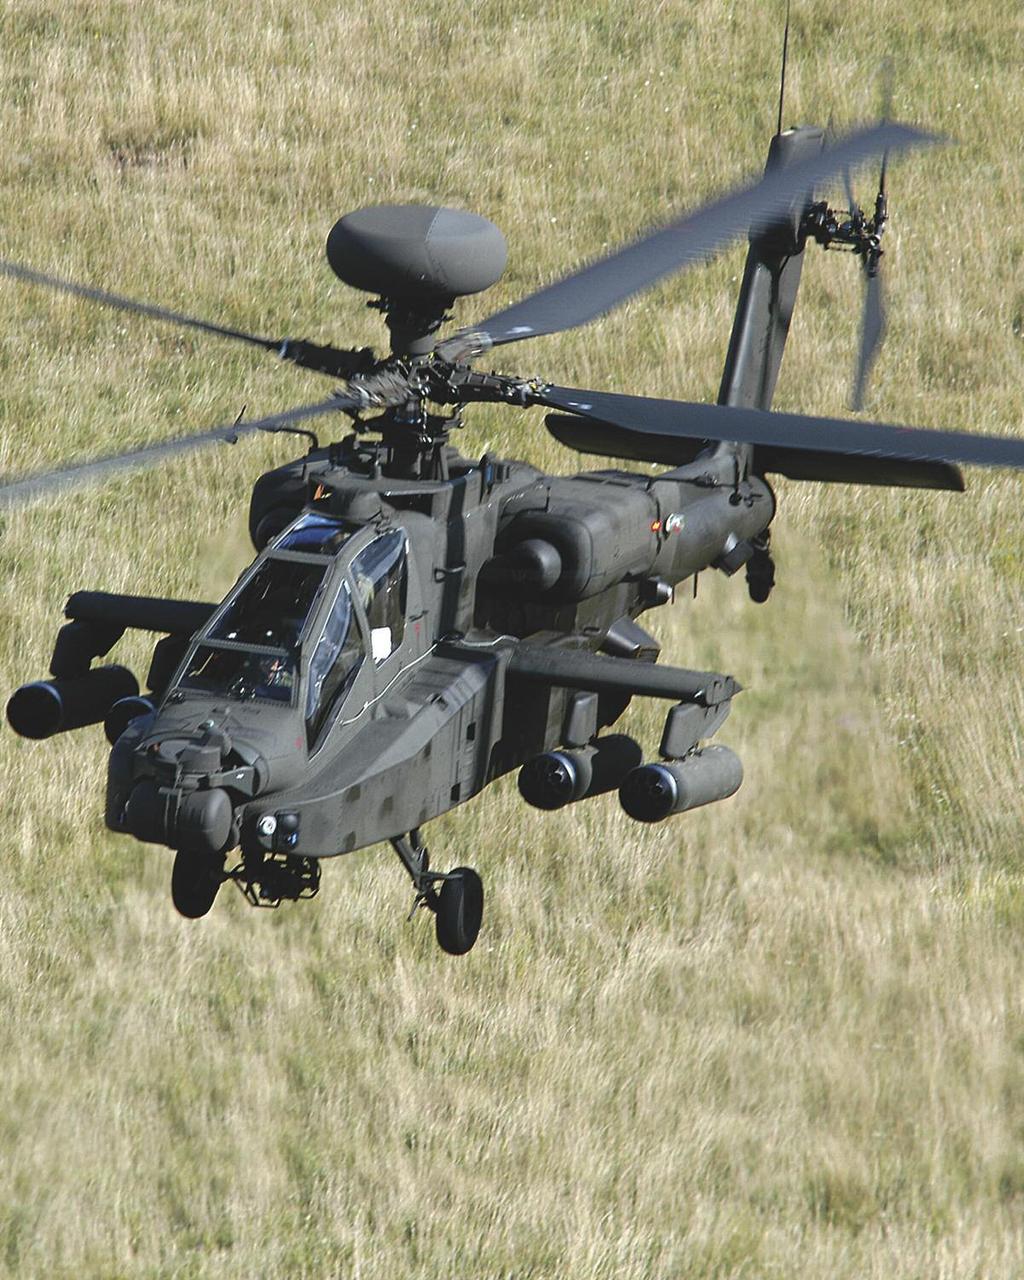 The Longbow Apache helicopter uses a radar system (the dome on the top of the main rotor) to